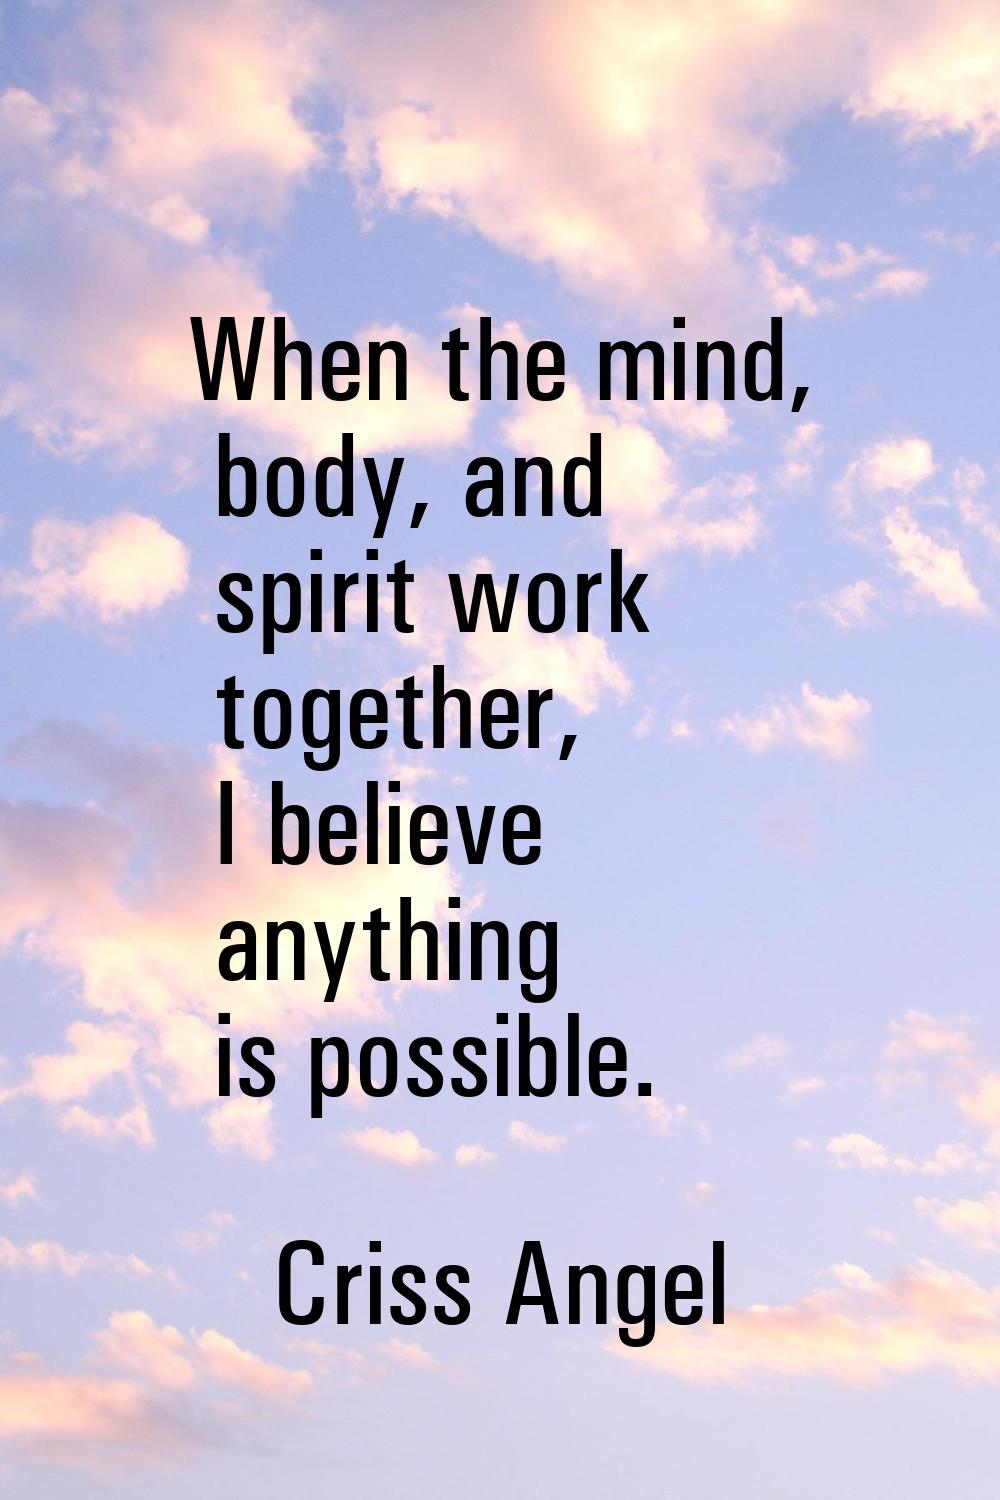 When the mind, body, and spirit work together, I believe anything is possible.